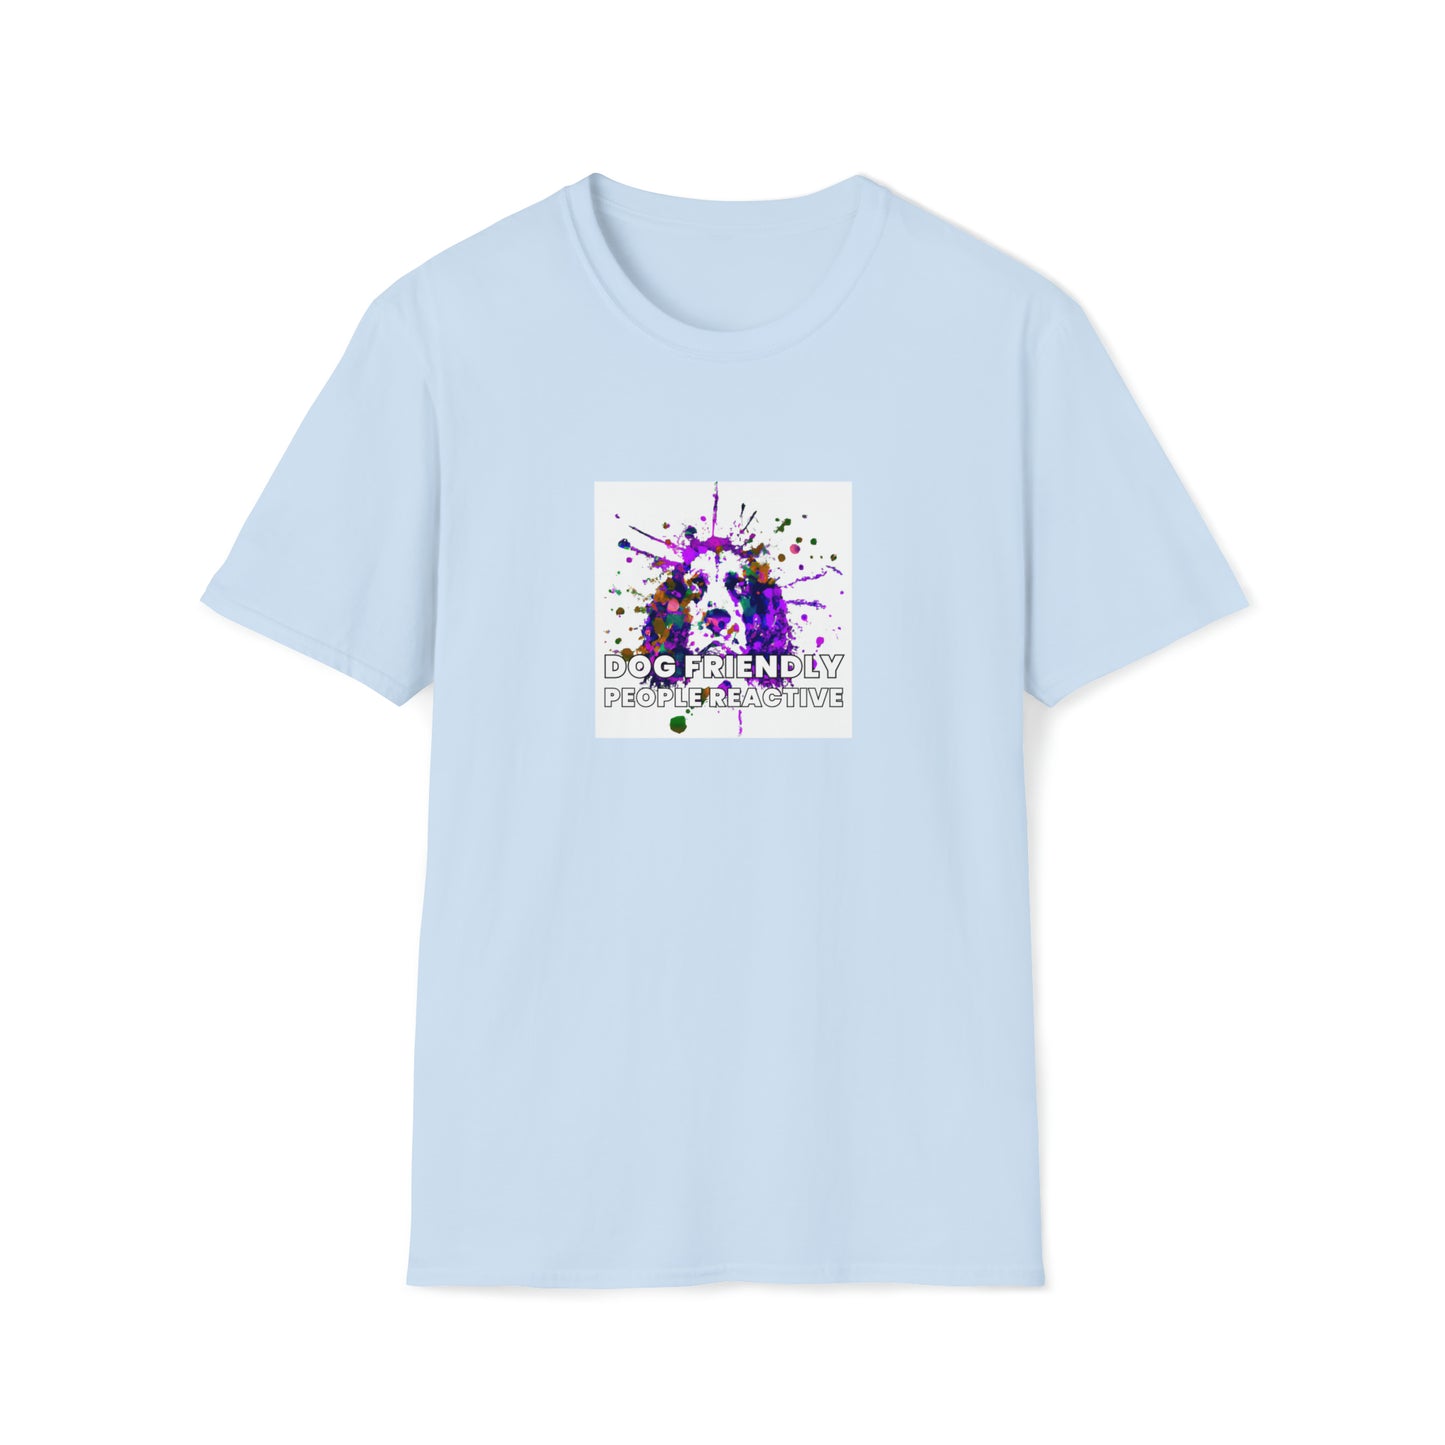 90s Fash Reality - "Dog Friendly, People Reactive" (colored swirl) Unisex Tee